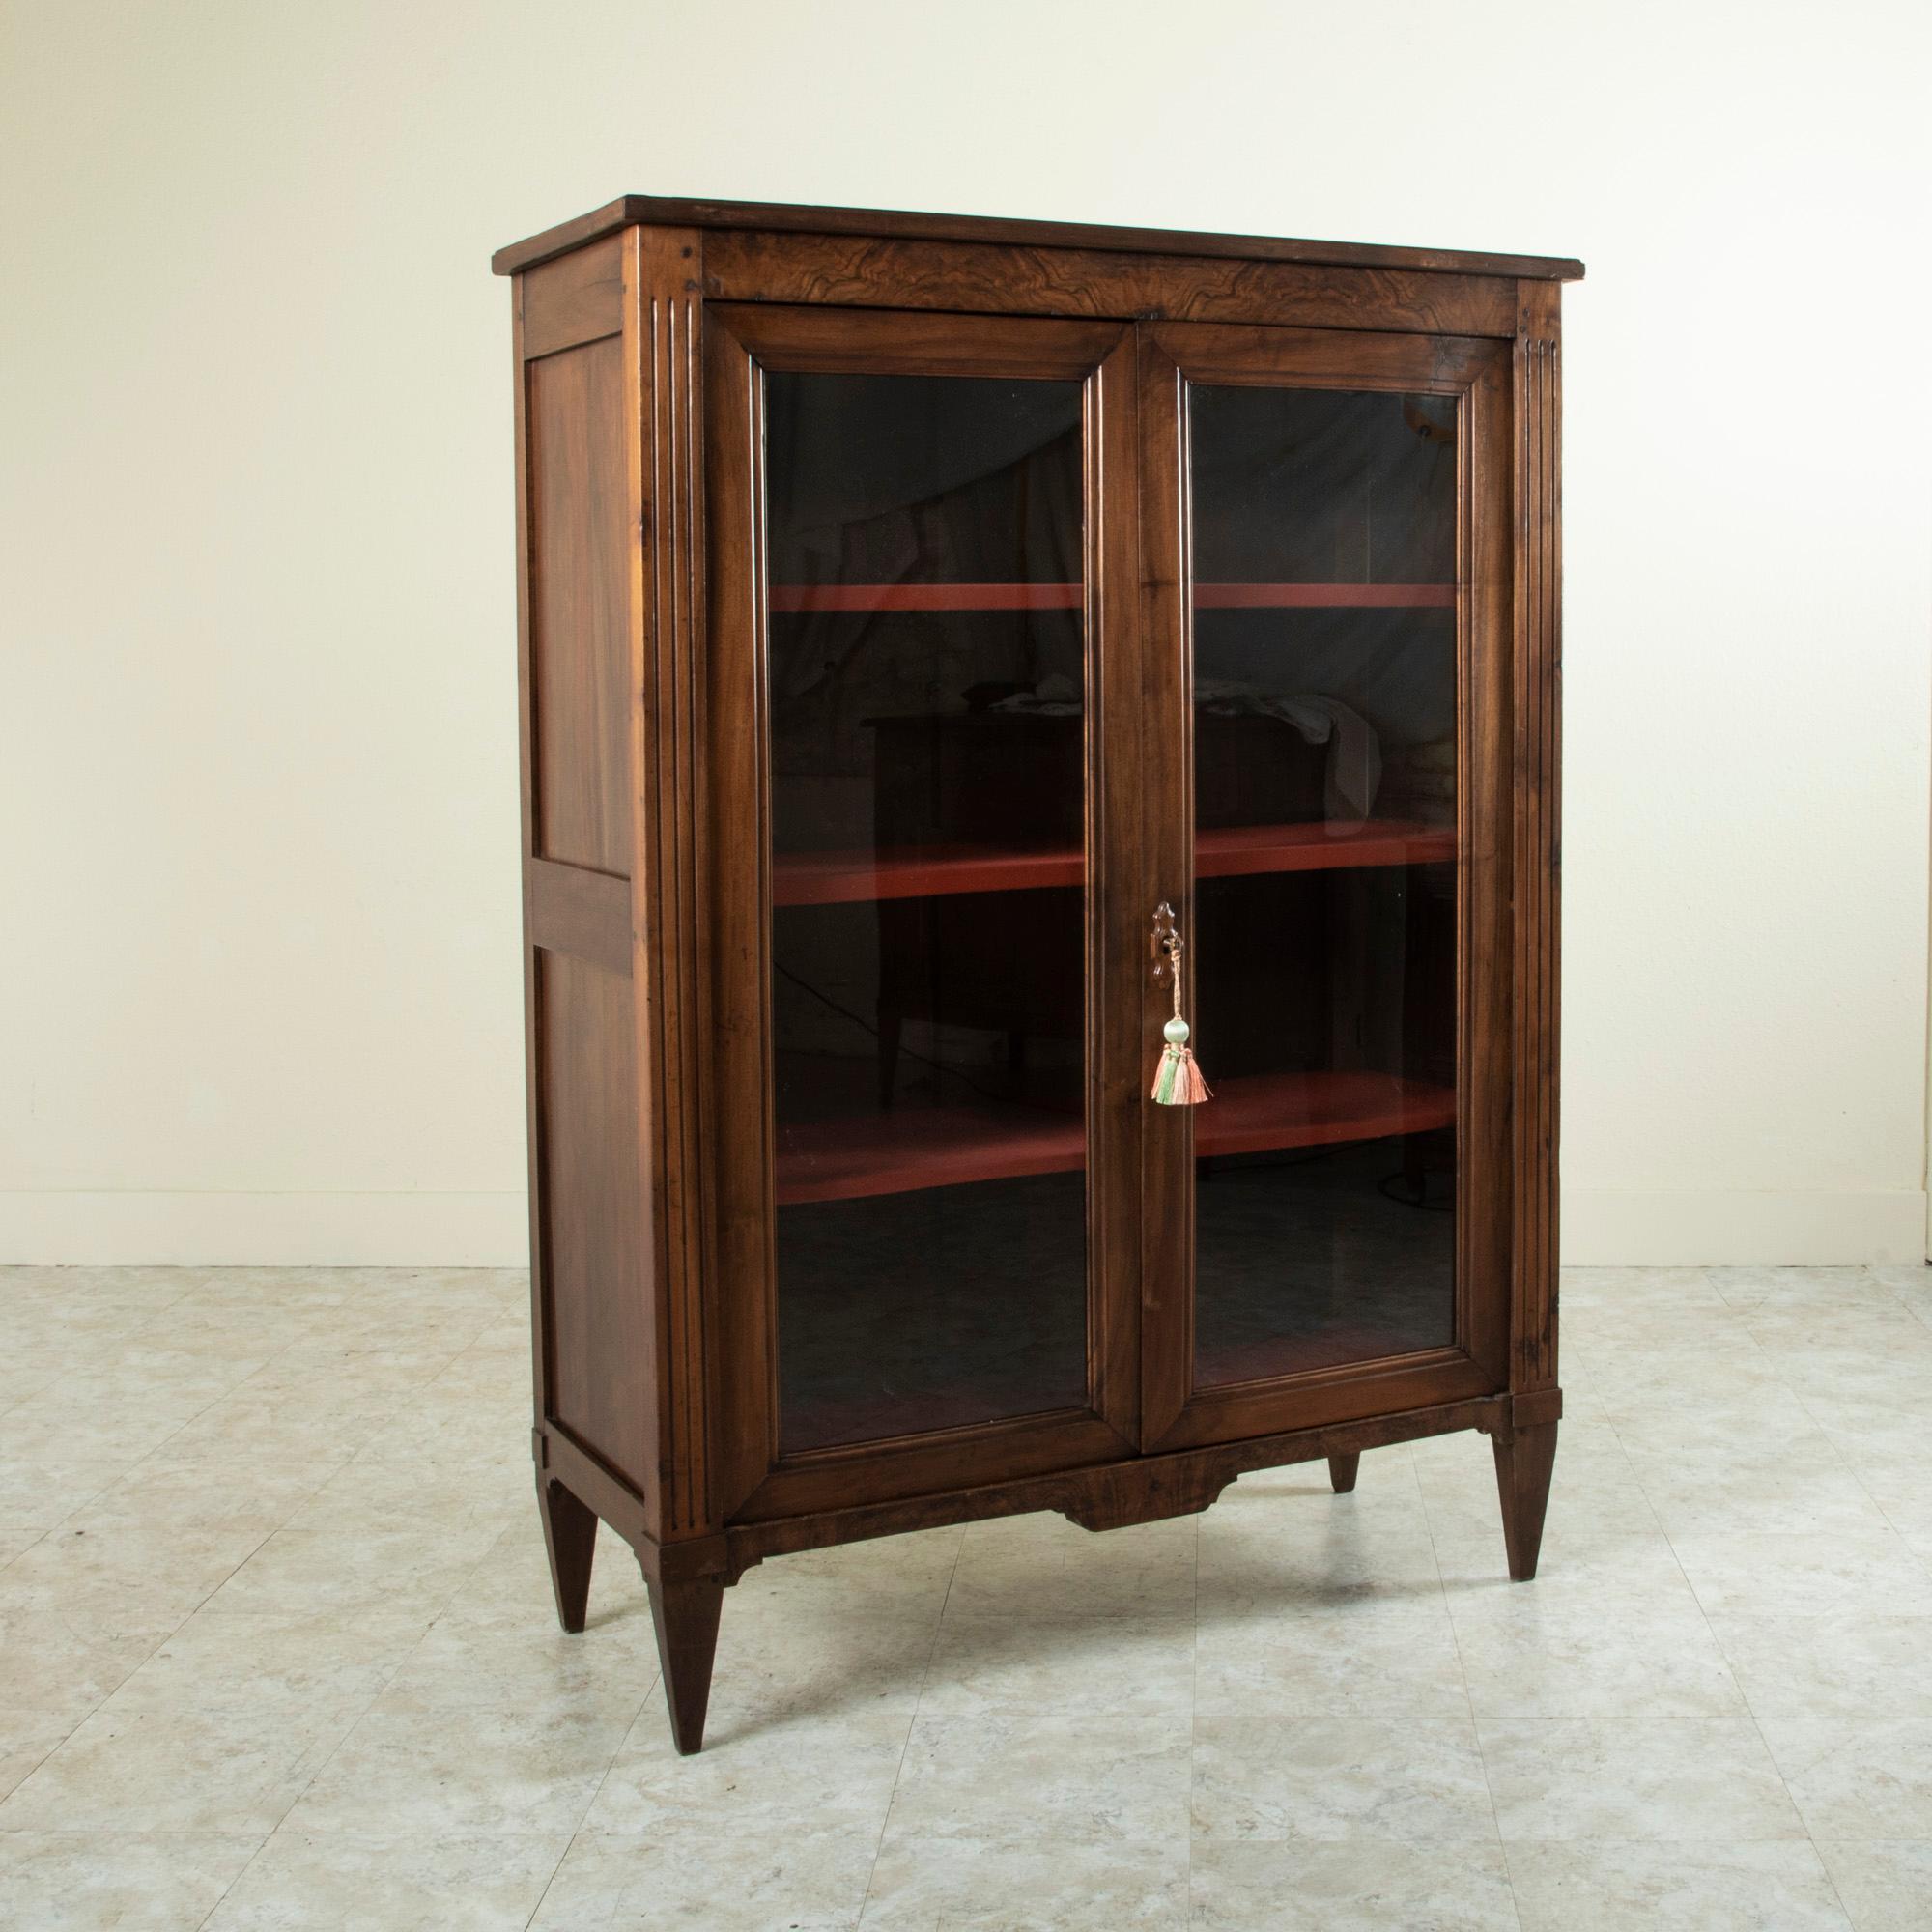 This late nineteenth century French Louis XVI style hand pegged walnut bookcase or vitrine features fluted corners that lead to tapered legs. Each side is constructed of solid walnut panels and the front is constructed of book matched burl walnut.